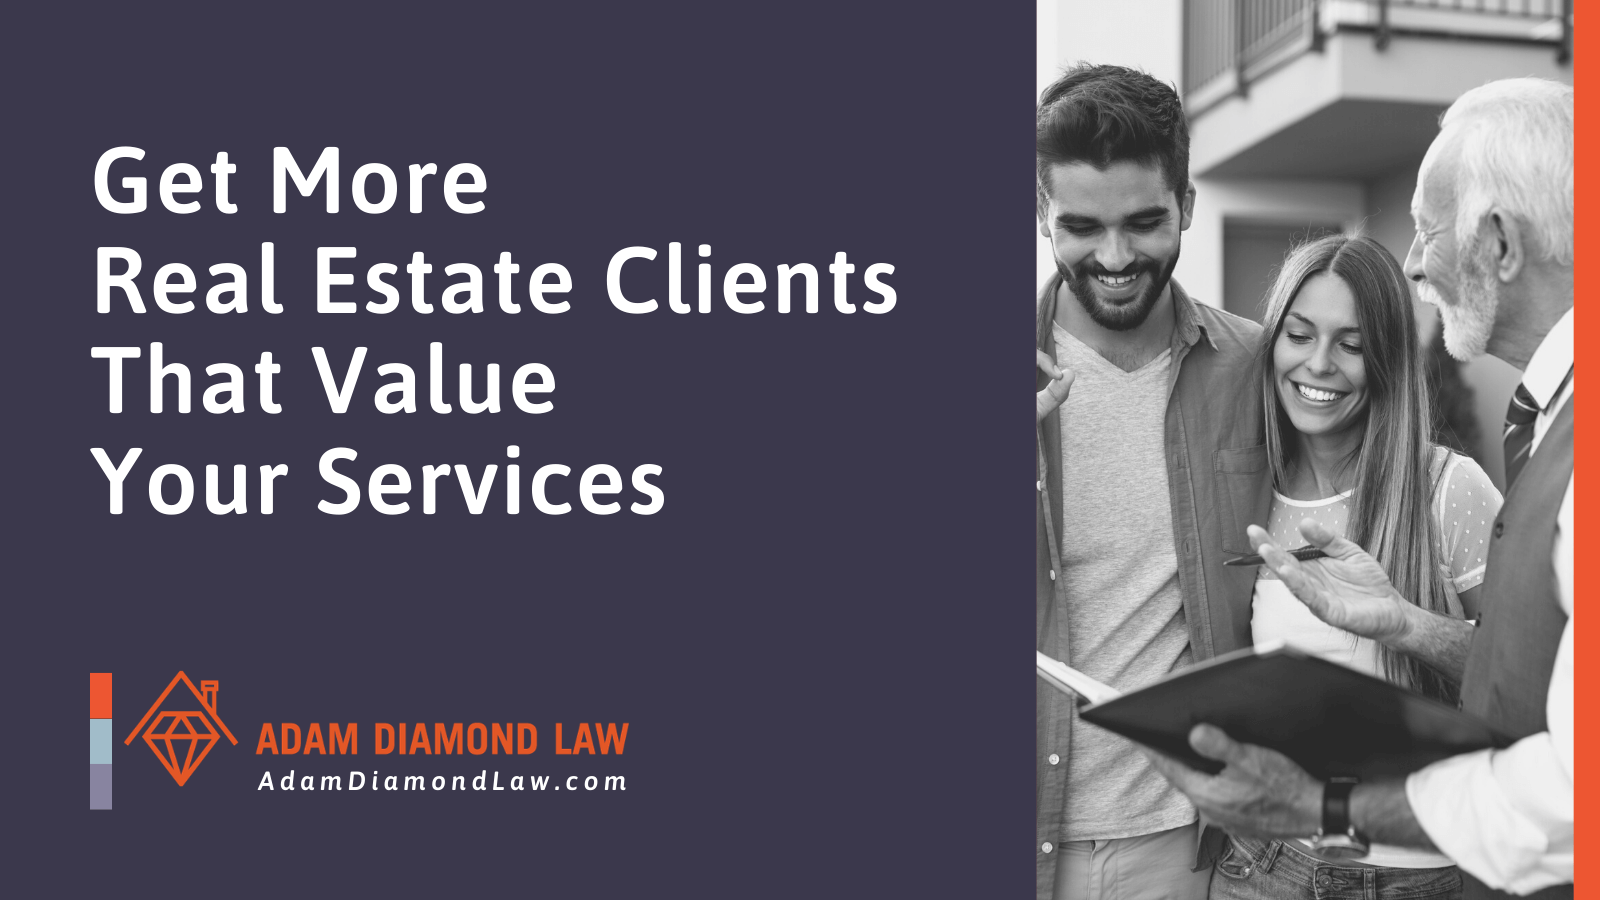 Get More Real Estate Clients That Value Your Services - Adam Diamond Law | McHenry, IL Residential Real Estate Lawyer